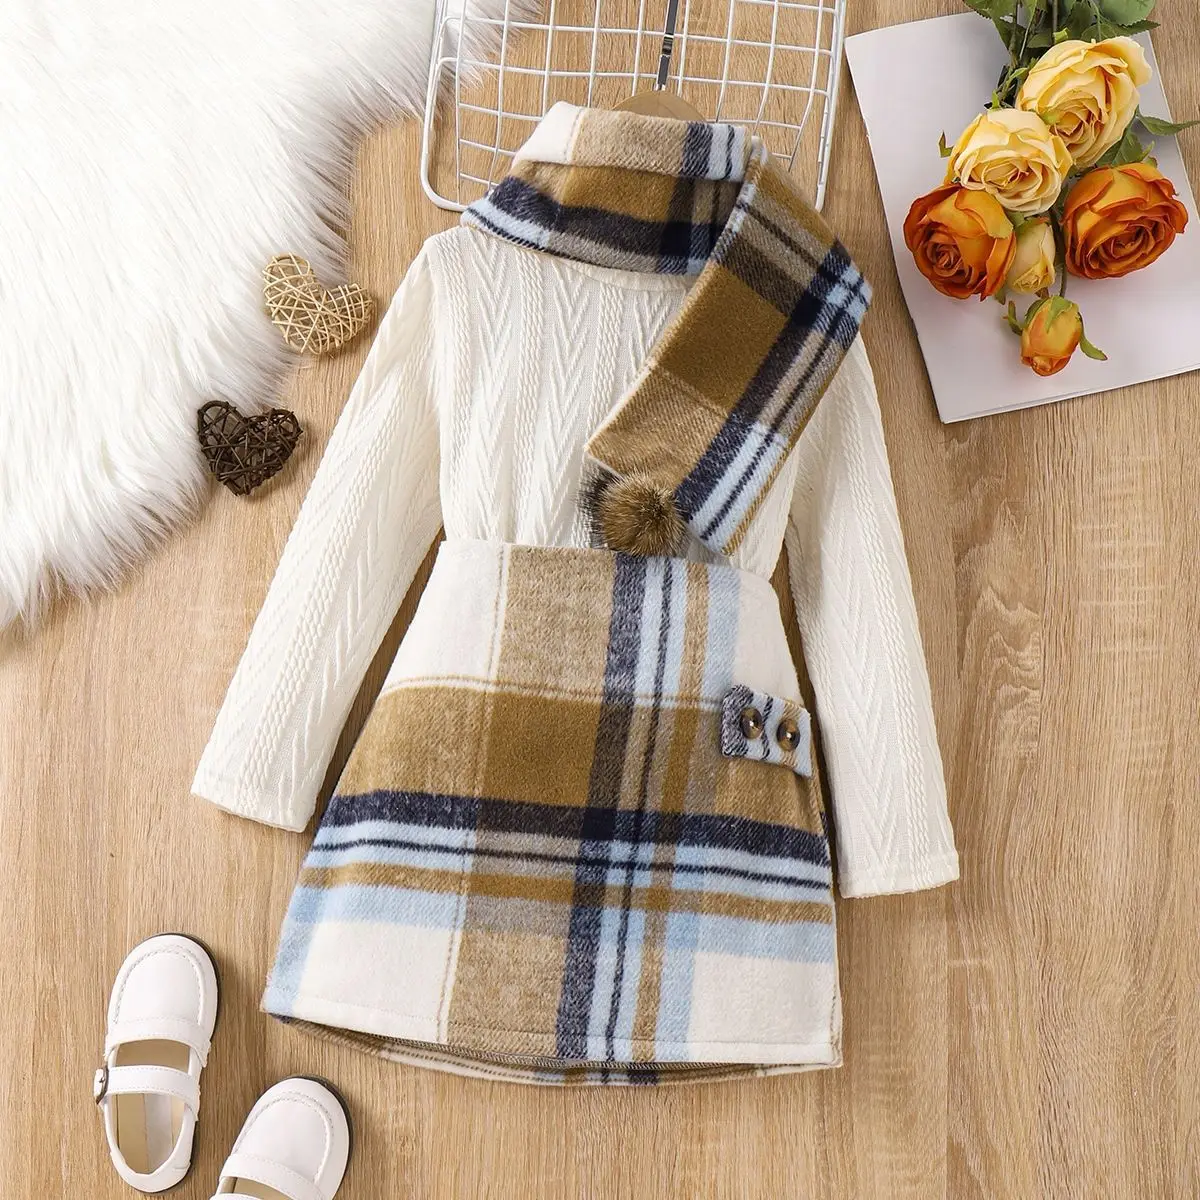 Wholesale autumn winter girls clothing sets long sleeve shirts+plaid skirt+ball scarf casual warm toddler kids outfits